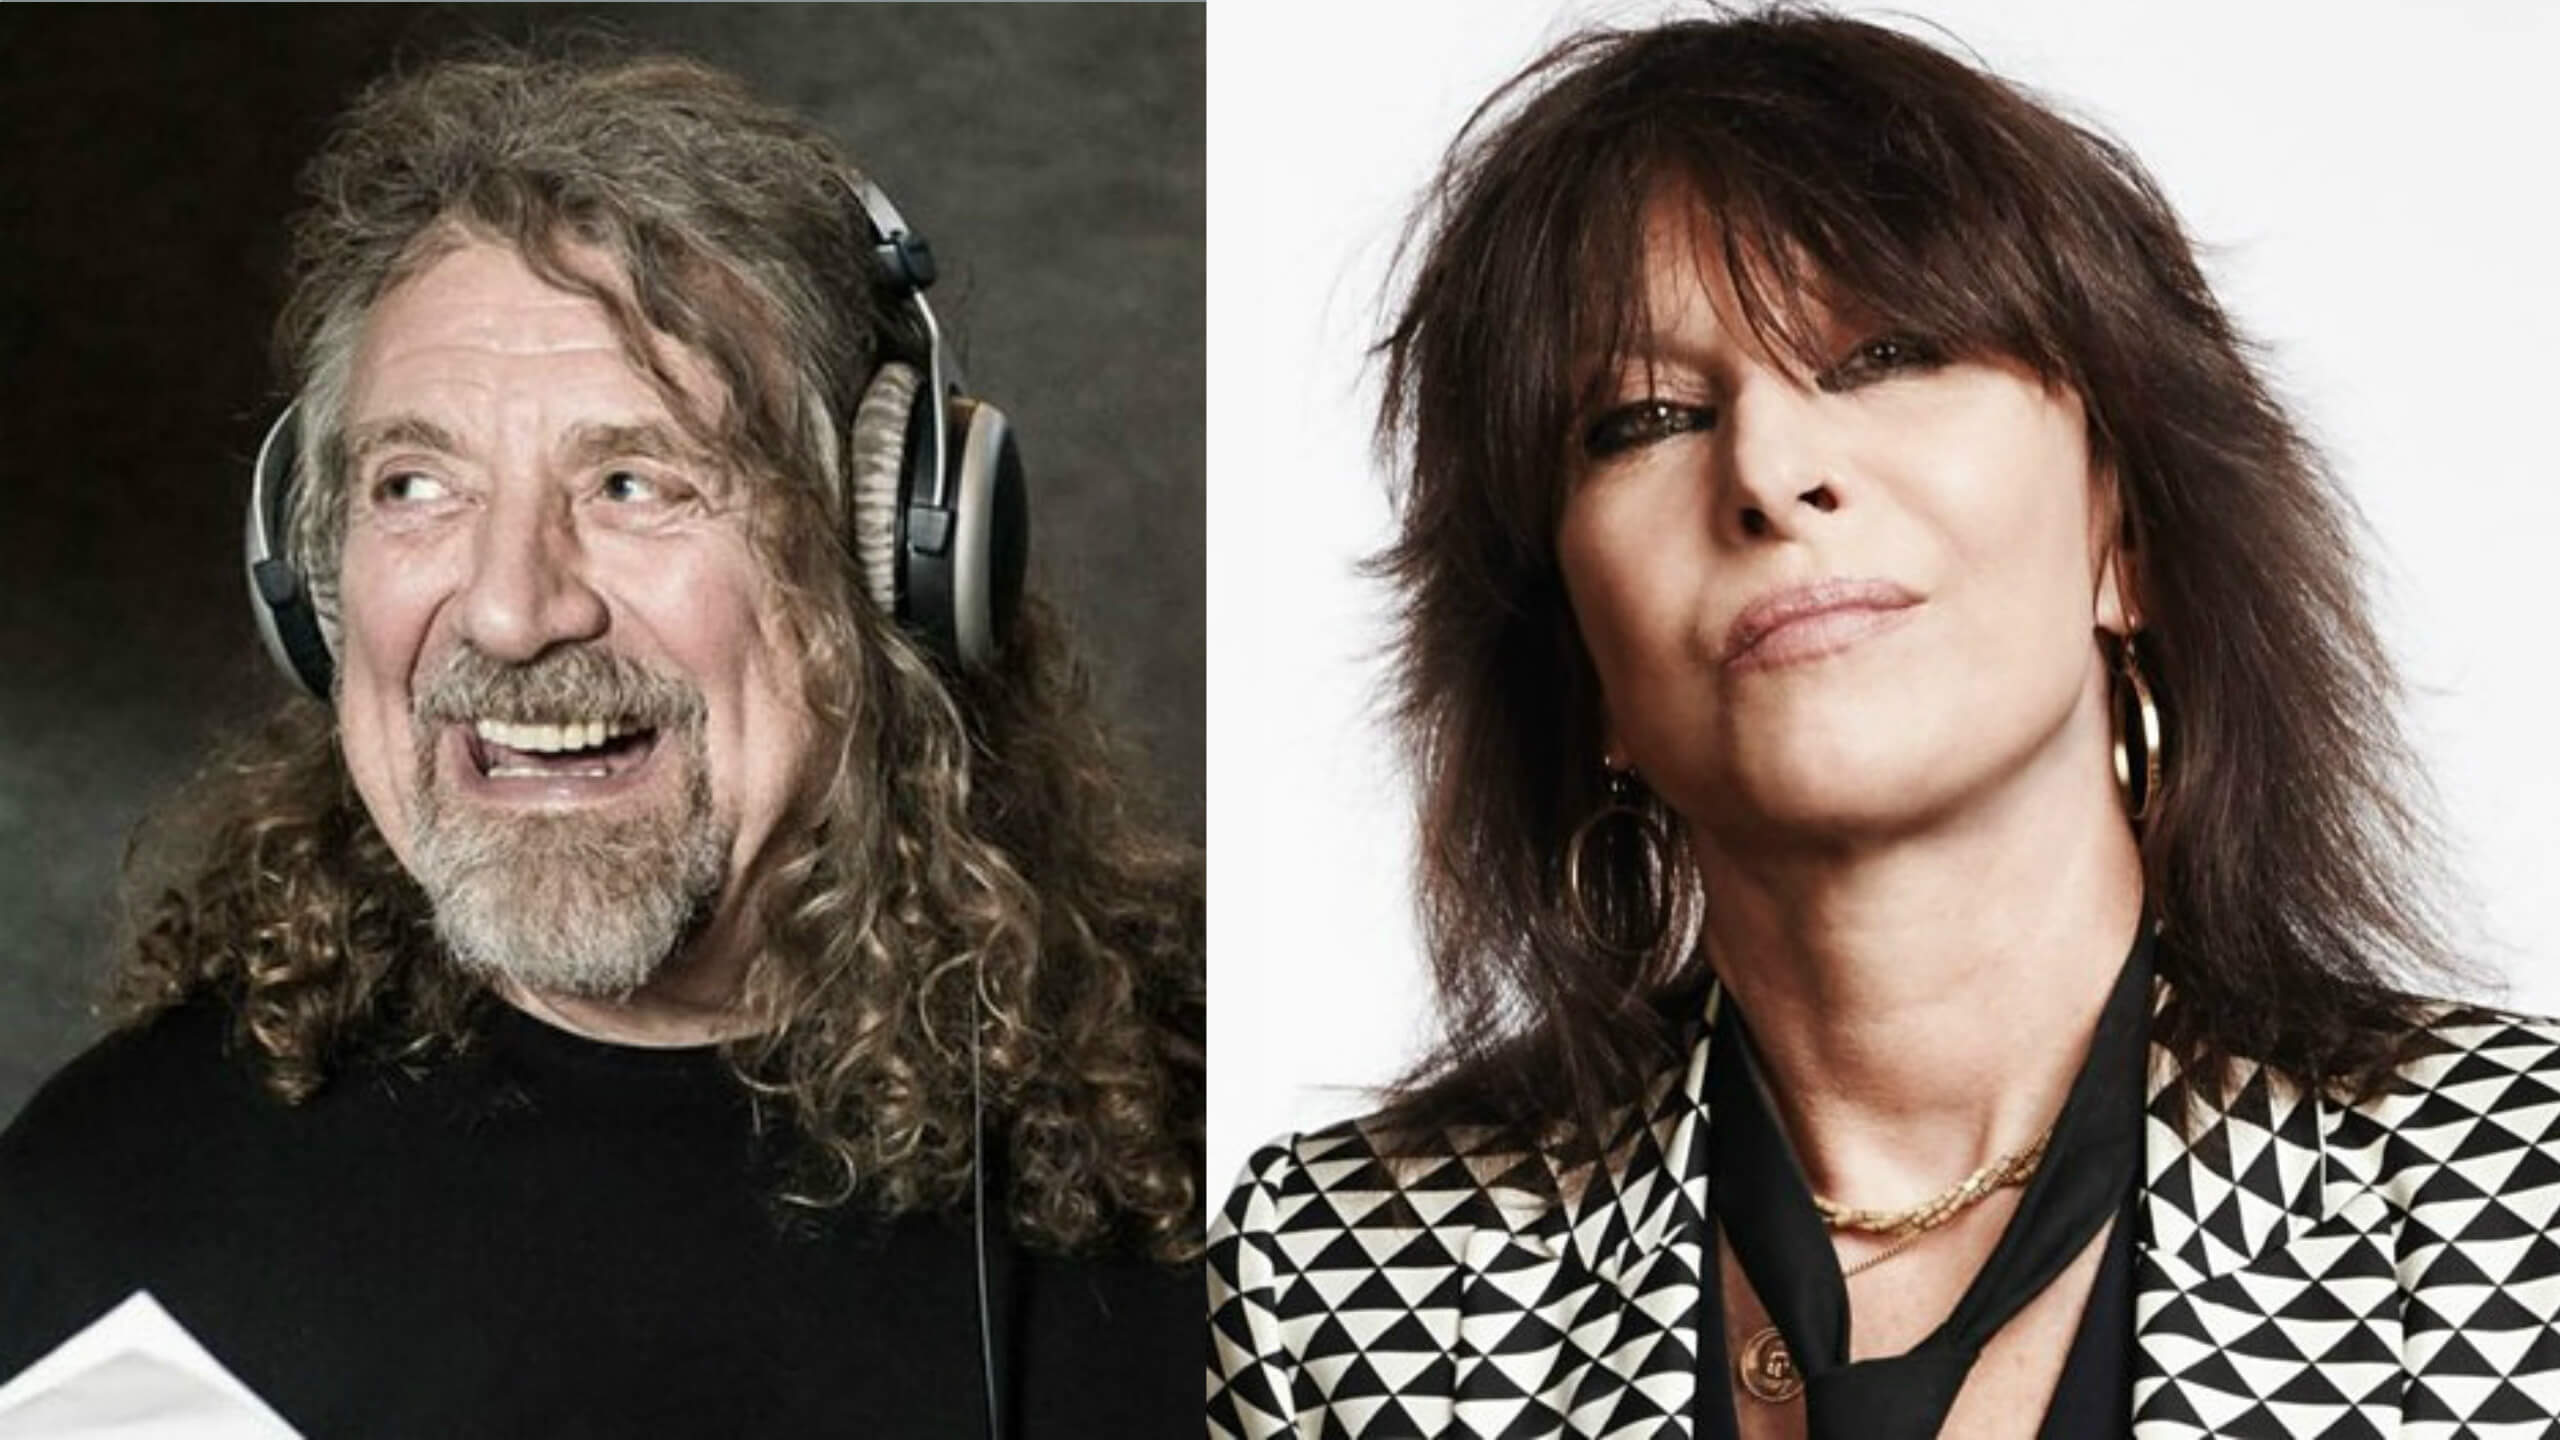 Robert Plant and Chrissie Hynde